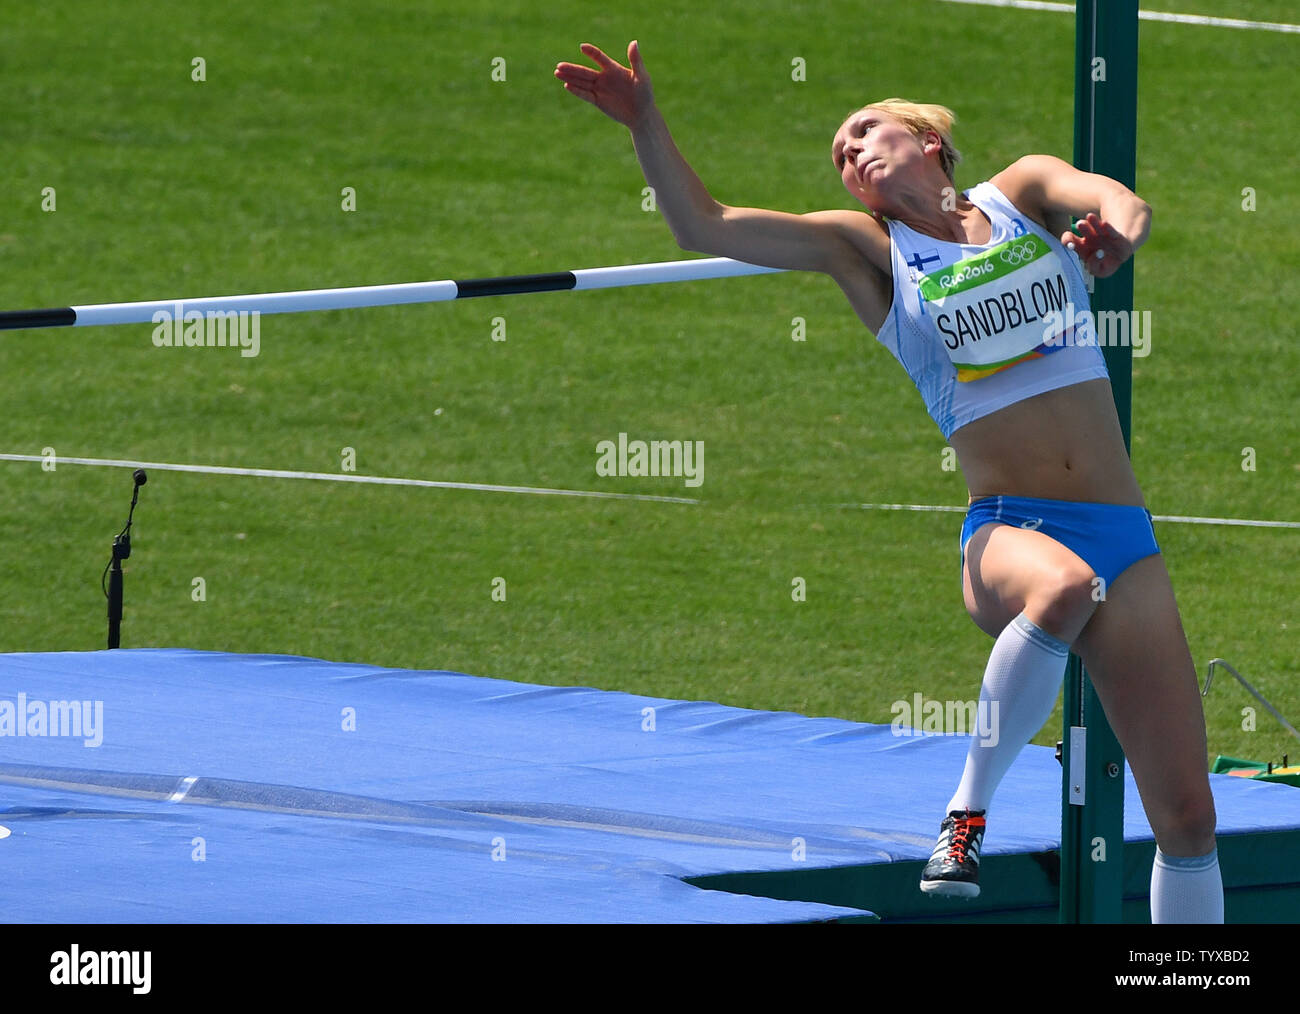 Linda Sandblom of Finland competes in the Womne's High Jump Qualifier at Olympic Stadium at the 2016 Rio Summer Olympics in Rio de Janeiro, Brazil, on August 18, 2016. Photo by Kevin Dietsch/UPI Stock Photo